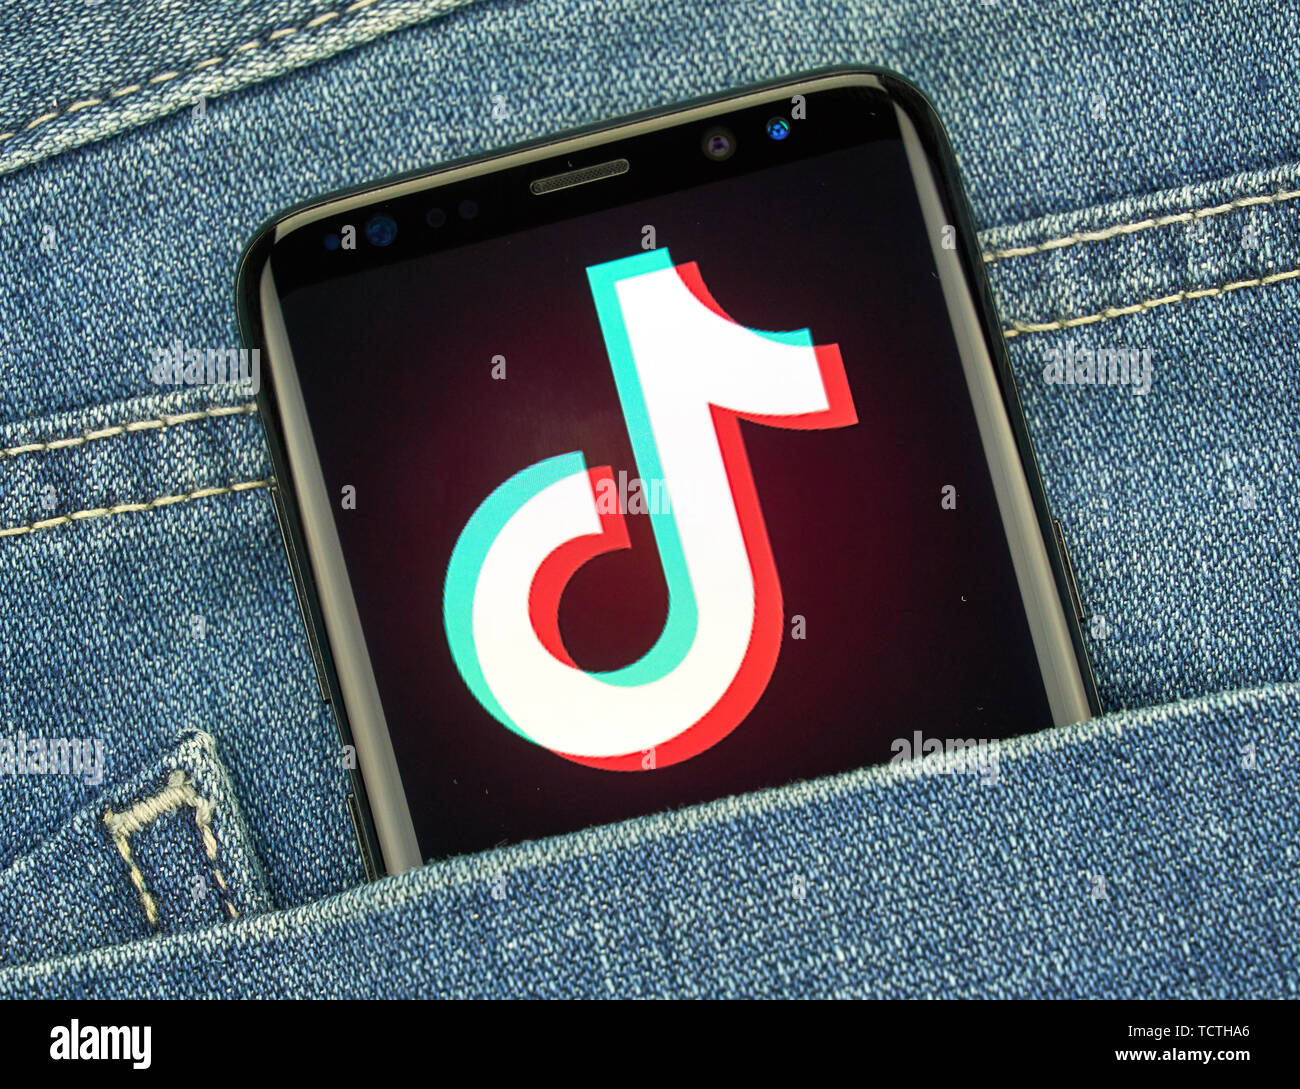 MONTREAL, CANADA - December 23, 2018: TikTok android app on Samsung s8 screen. TikTok is an Android and iOS media app for creating and sharing short v Stock Photo